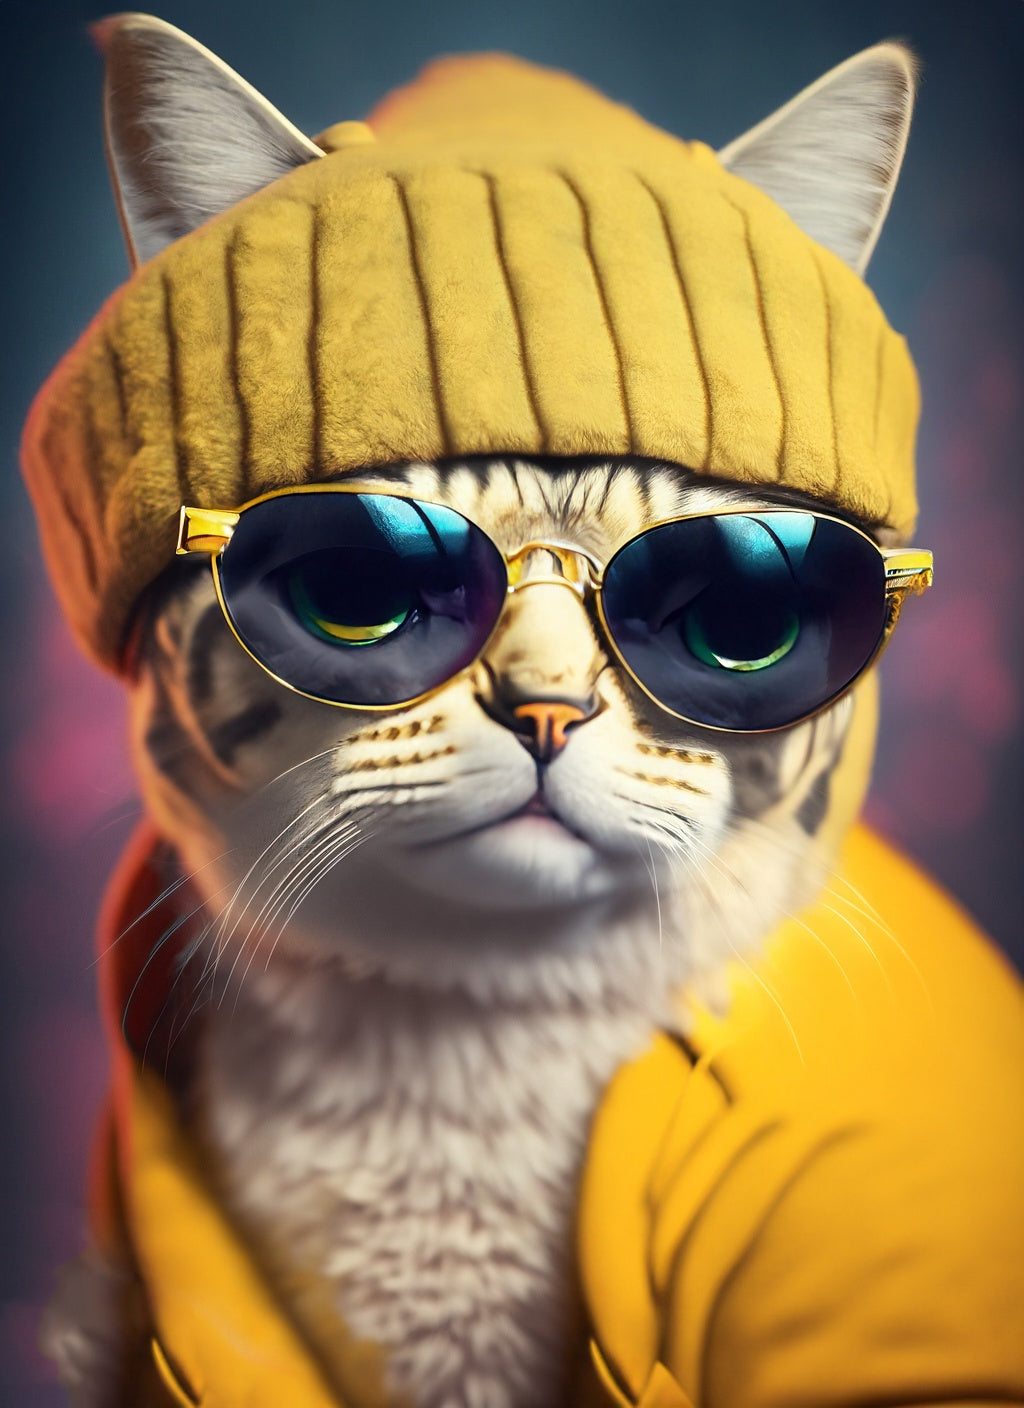 Hip Cat with Yellow Beanie and Sunglasses Photograph II Art Print